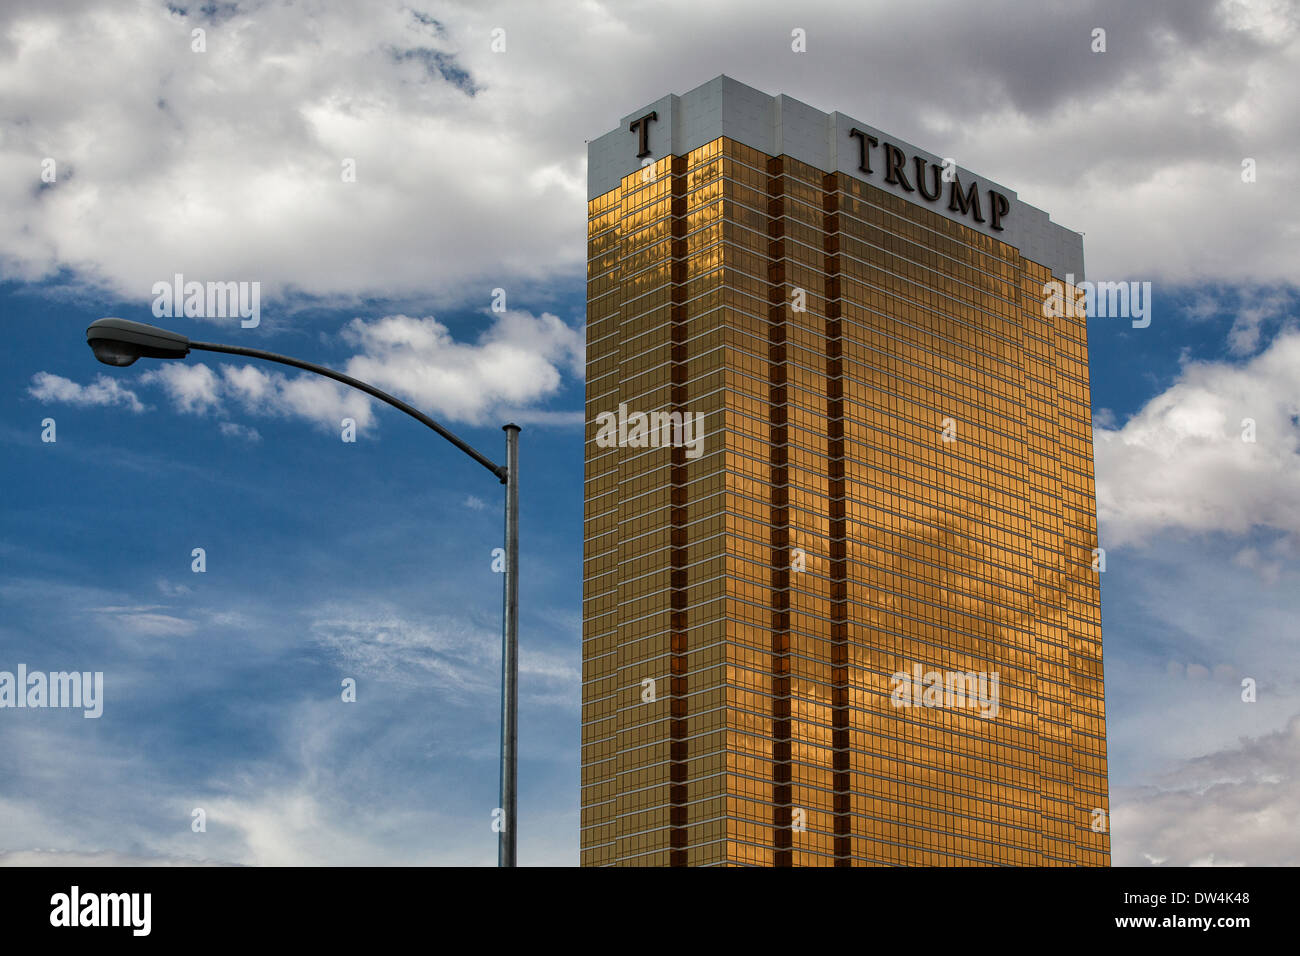 The Trump hotel Las Vegas.This 64 story hotel has exterior windows coated in 24 carat gold Stock Photo